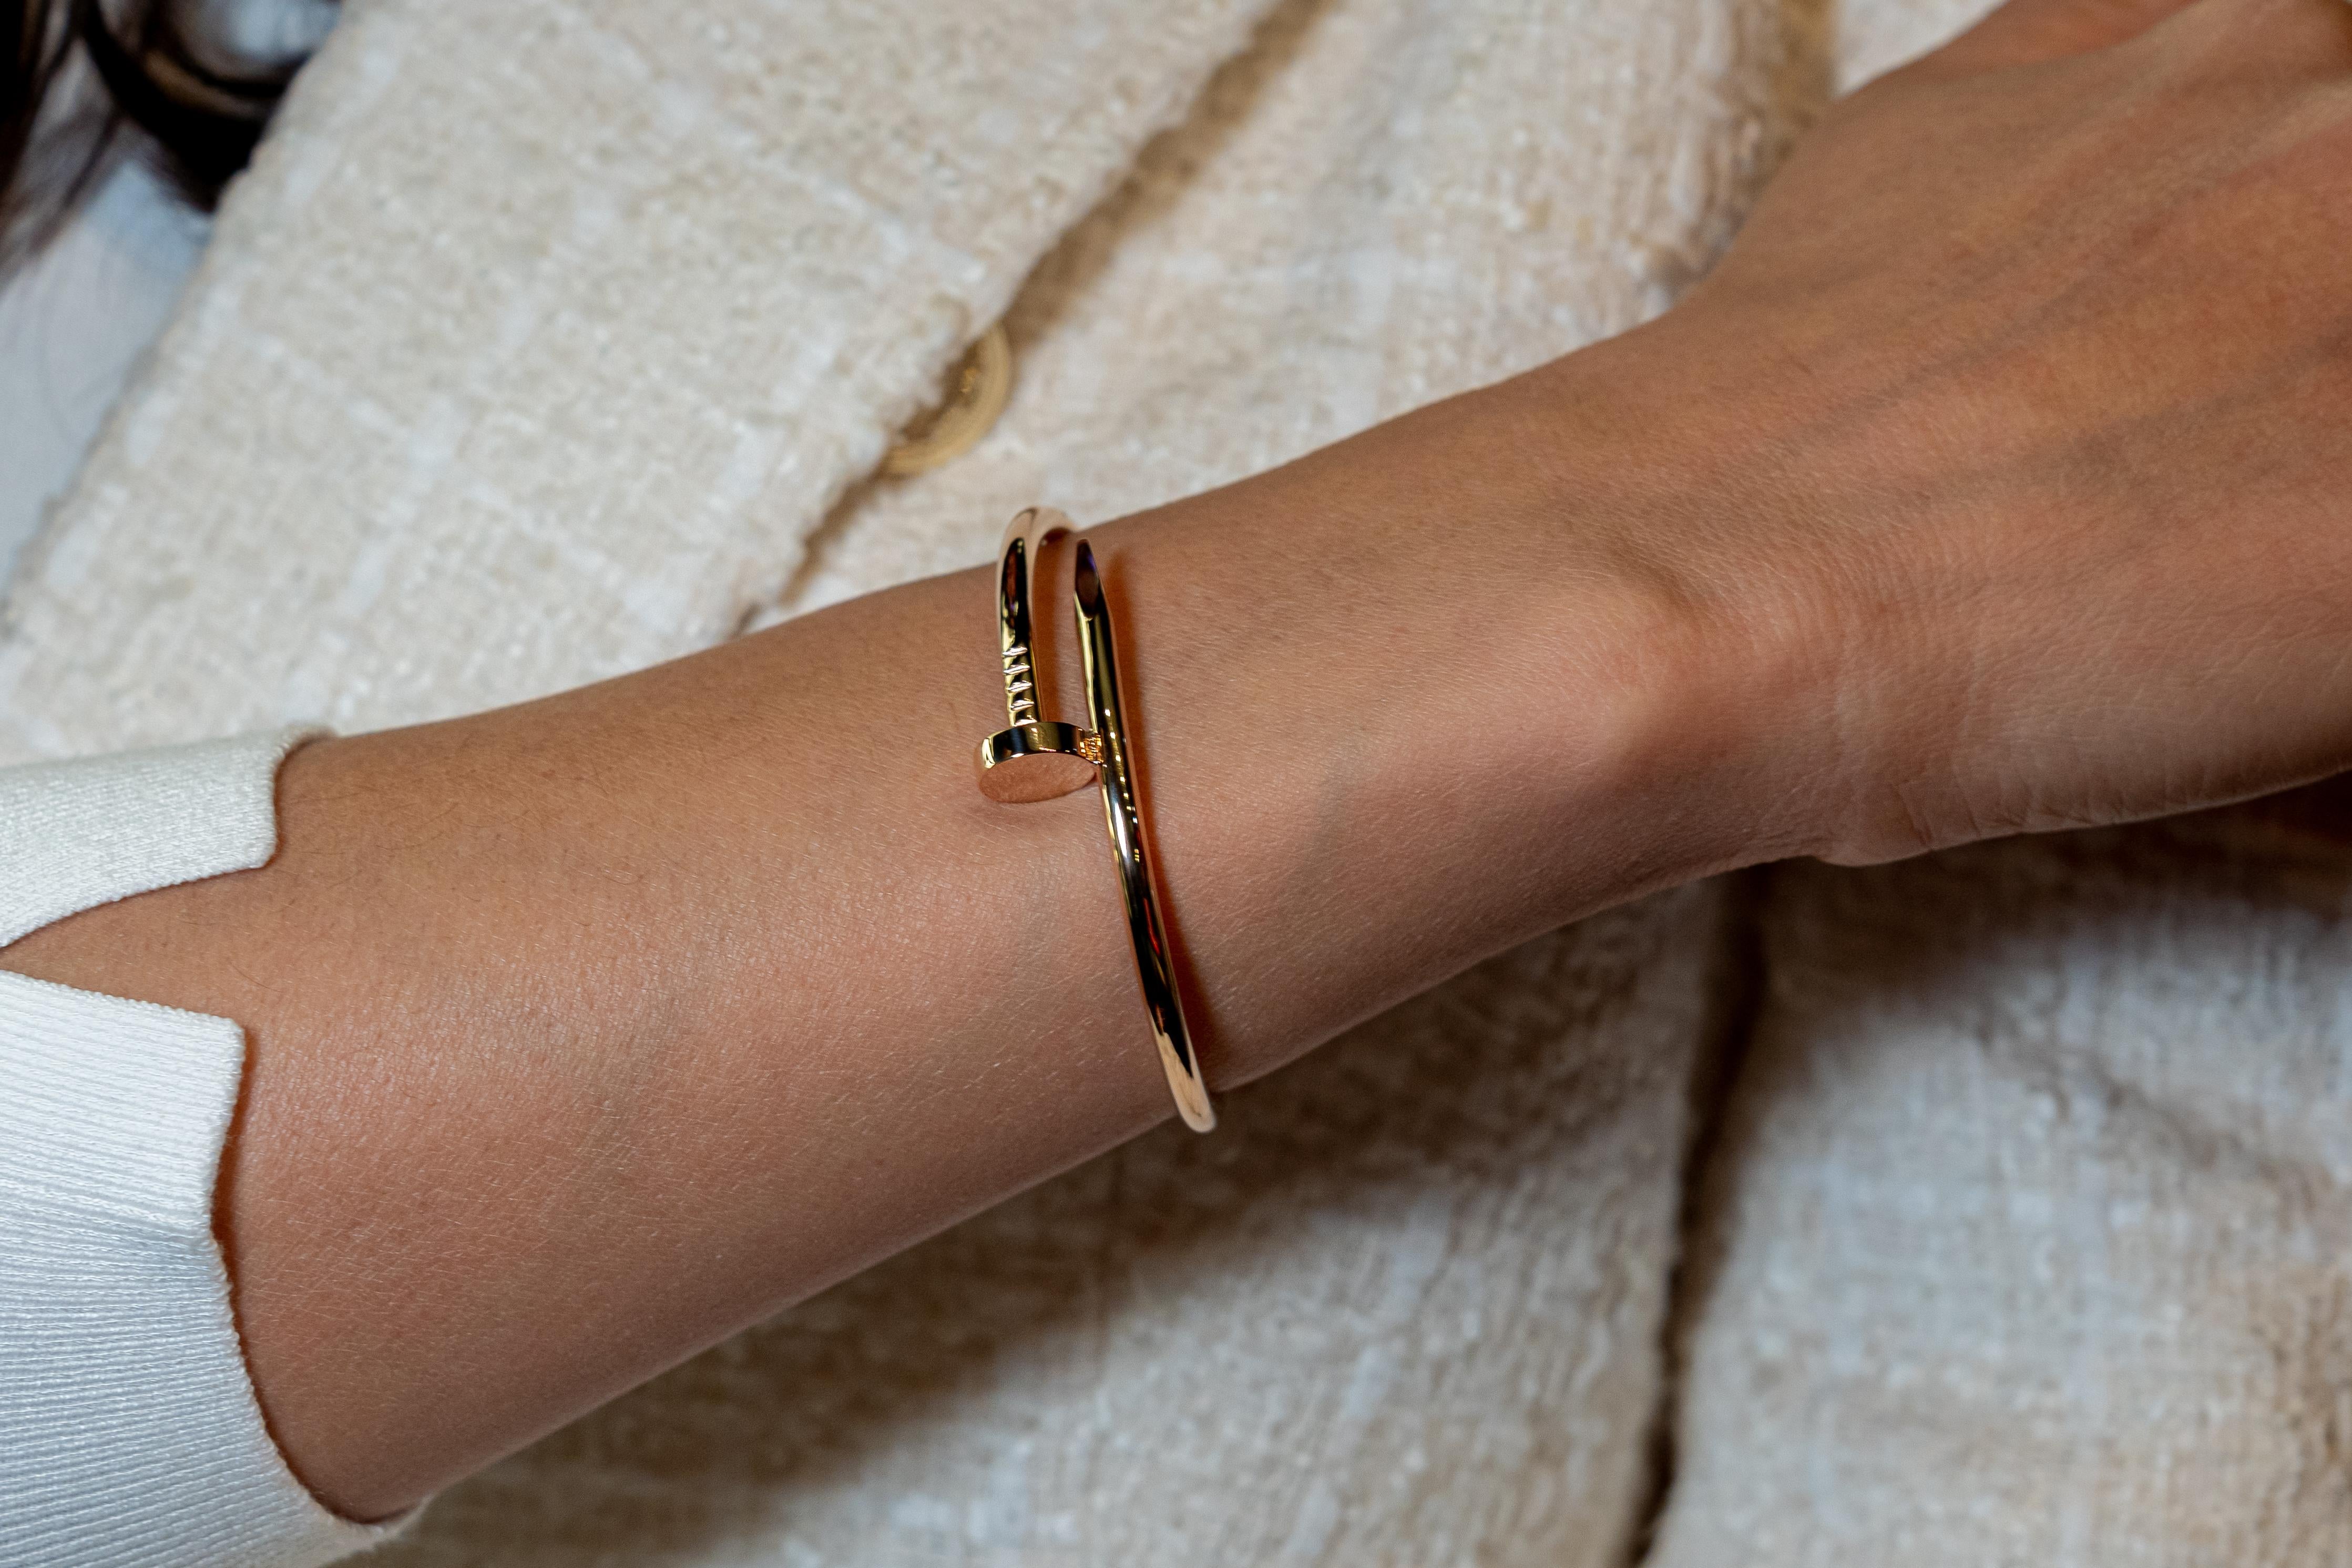 Cartier Juste Un clou bracelet in 18k rose gold  excellent condition and recently polished. 17 CM size. Comes with box; certificate of authenticity .The collection was designed in the mid seventies by Cartier in New York . unconventional and unisex